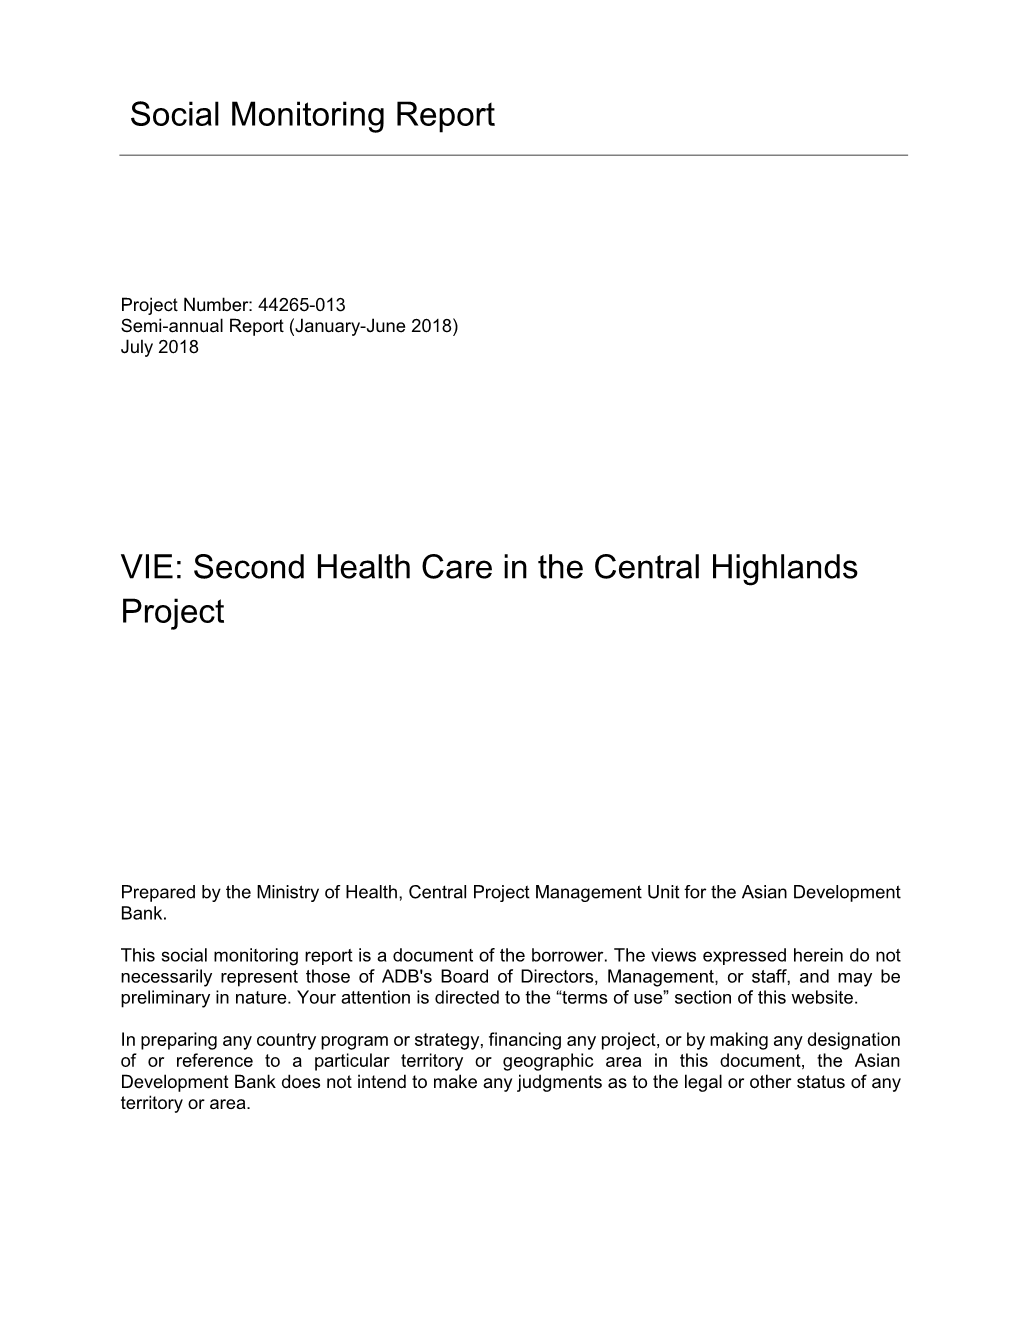 Second Health Care in the Central Highlands Project